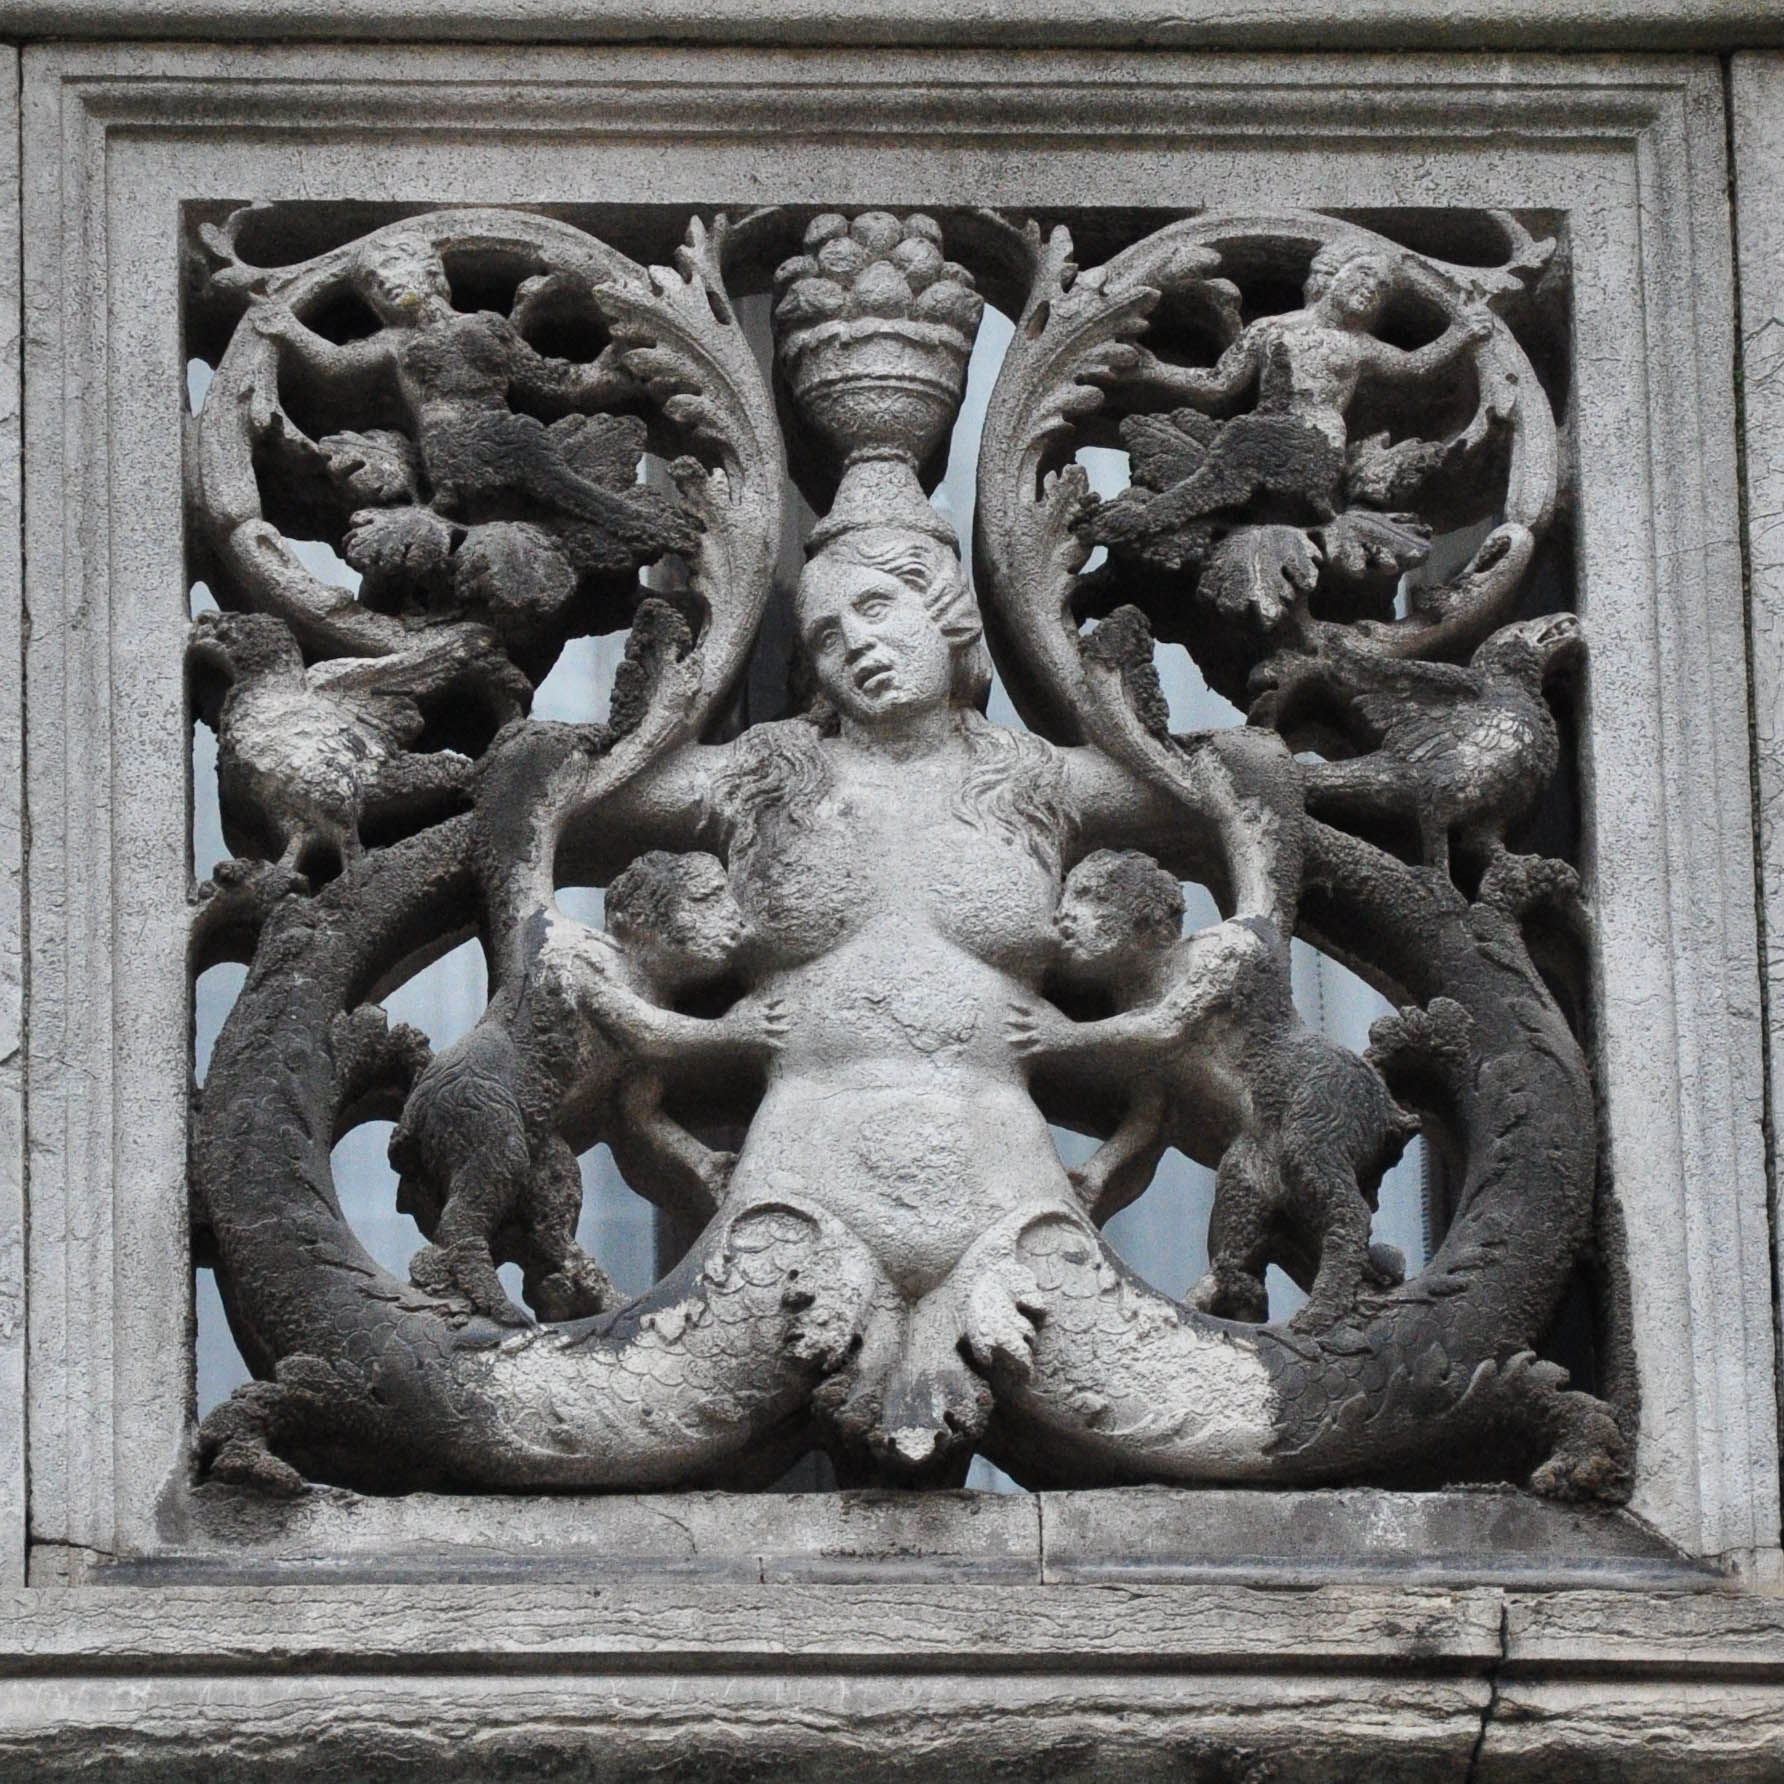 A close-up of a balcony with a brestfeeding bas-relief, Venice, Italy